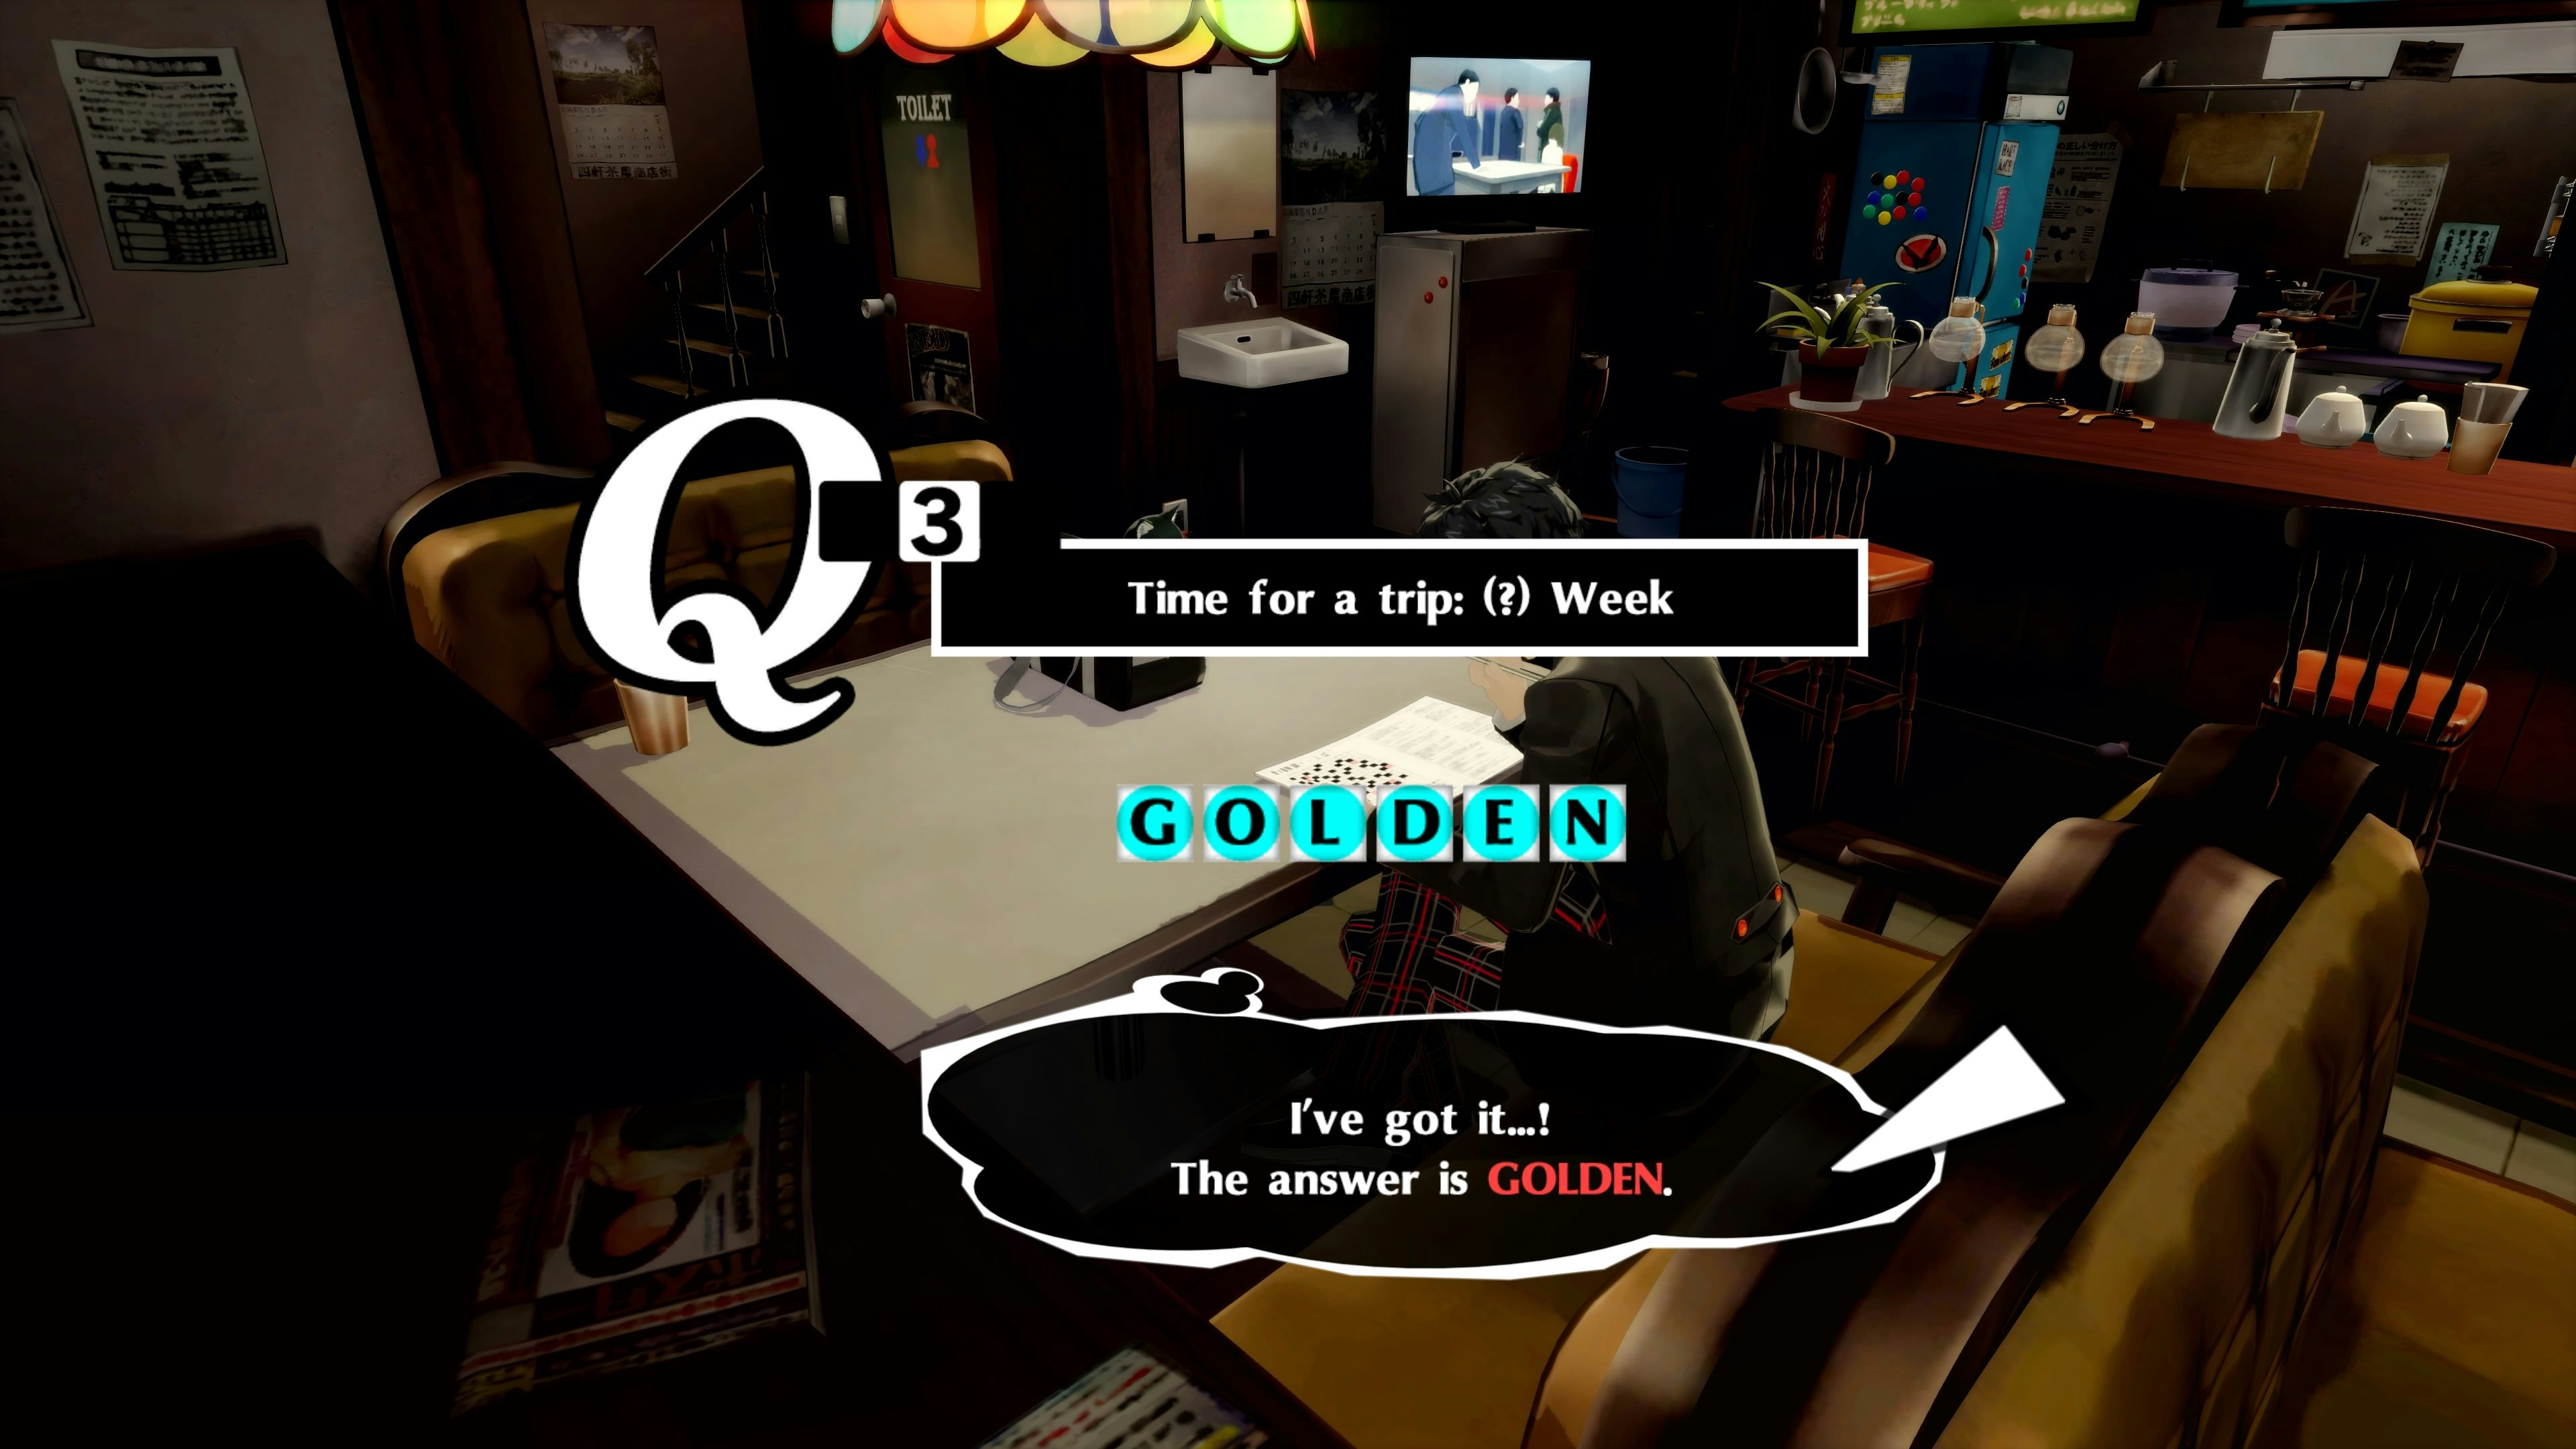 Persona 5 Royal Crossword Puzzle Answers All 34 Solutions To Boost Your Knowledge